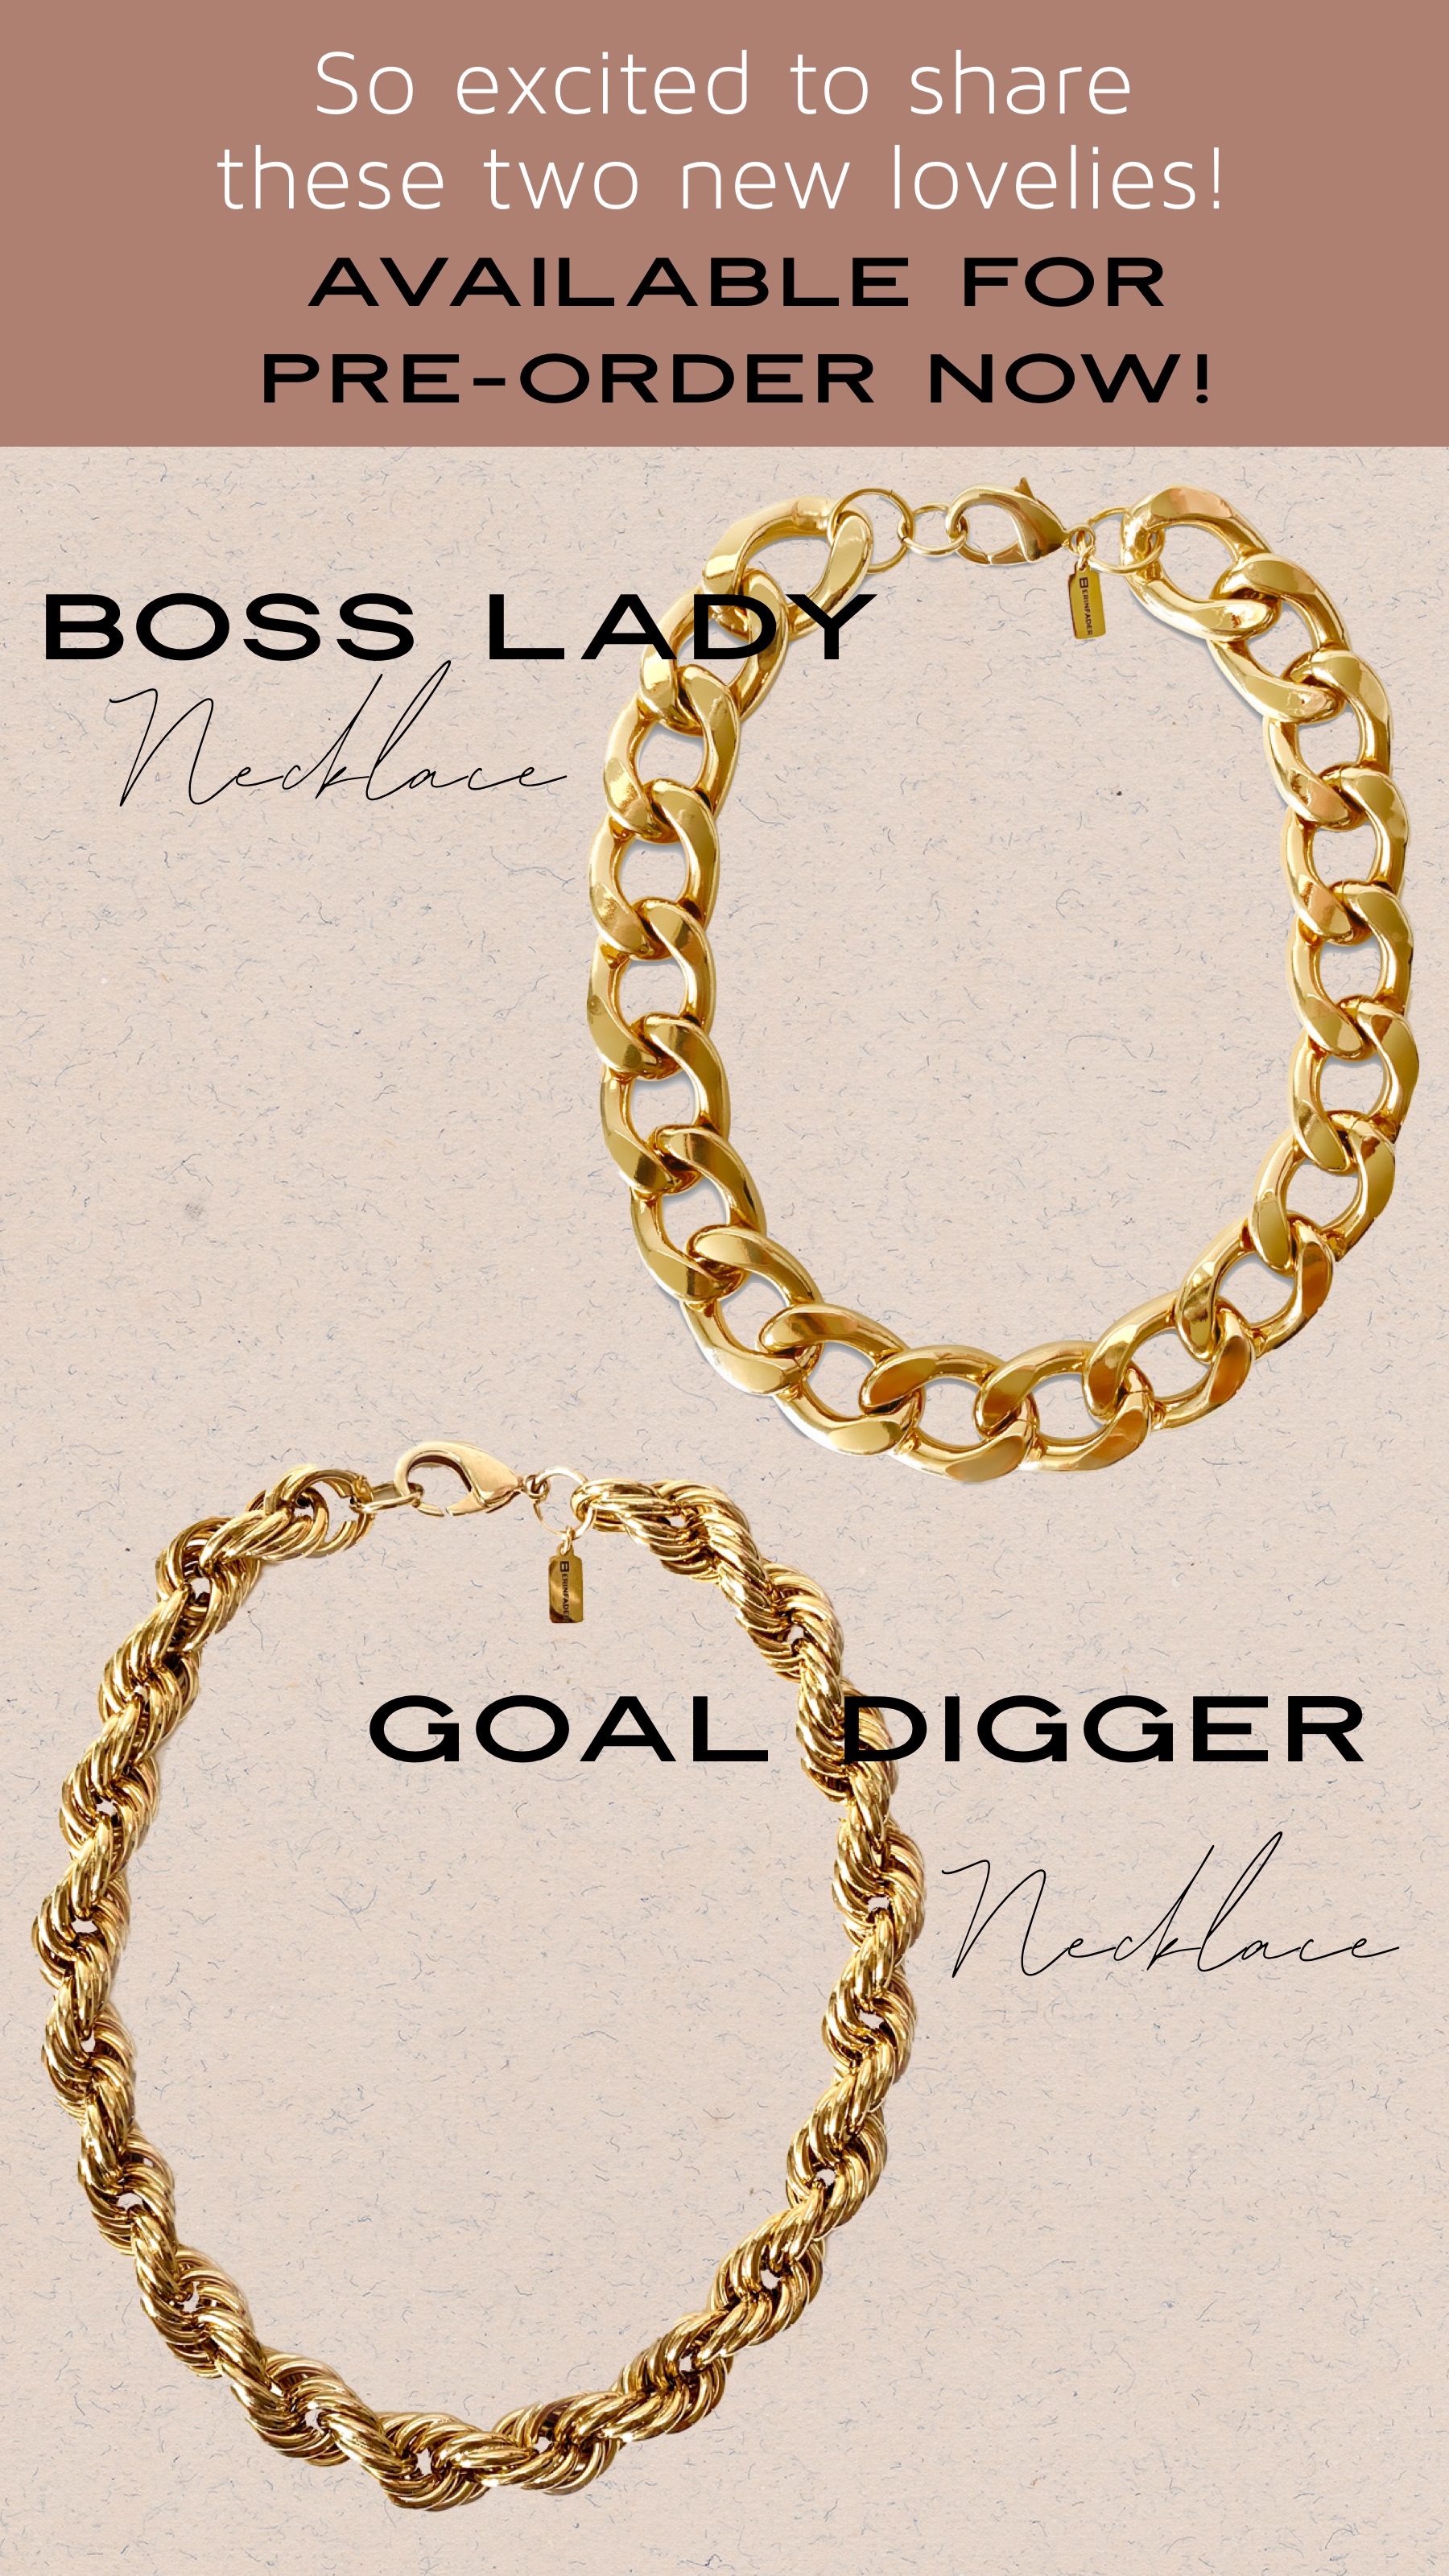 Pre-Order Boss Lady and Goal Digger Necklaces Now!!